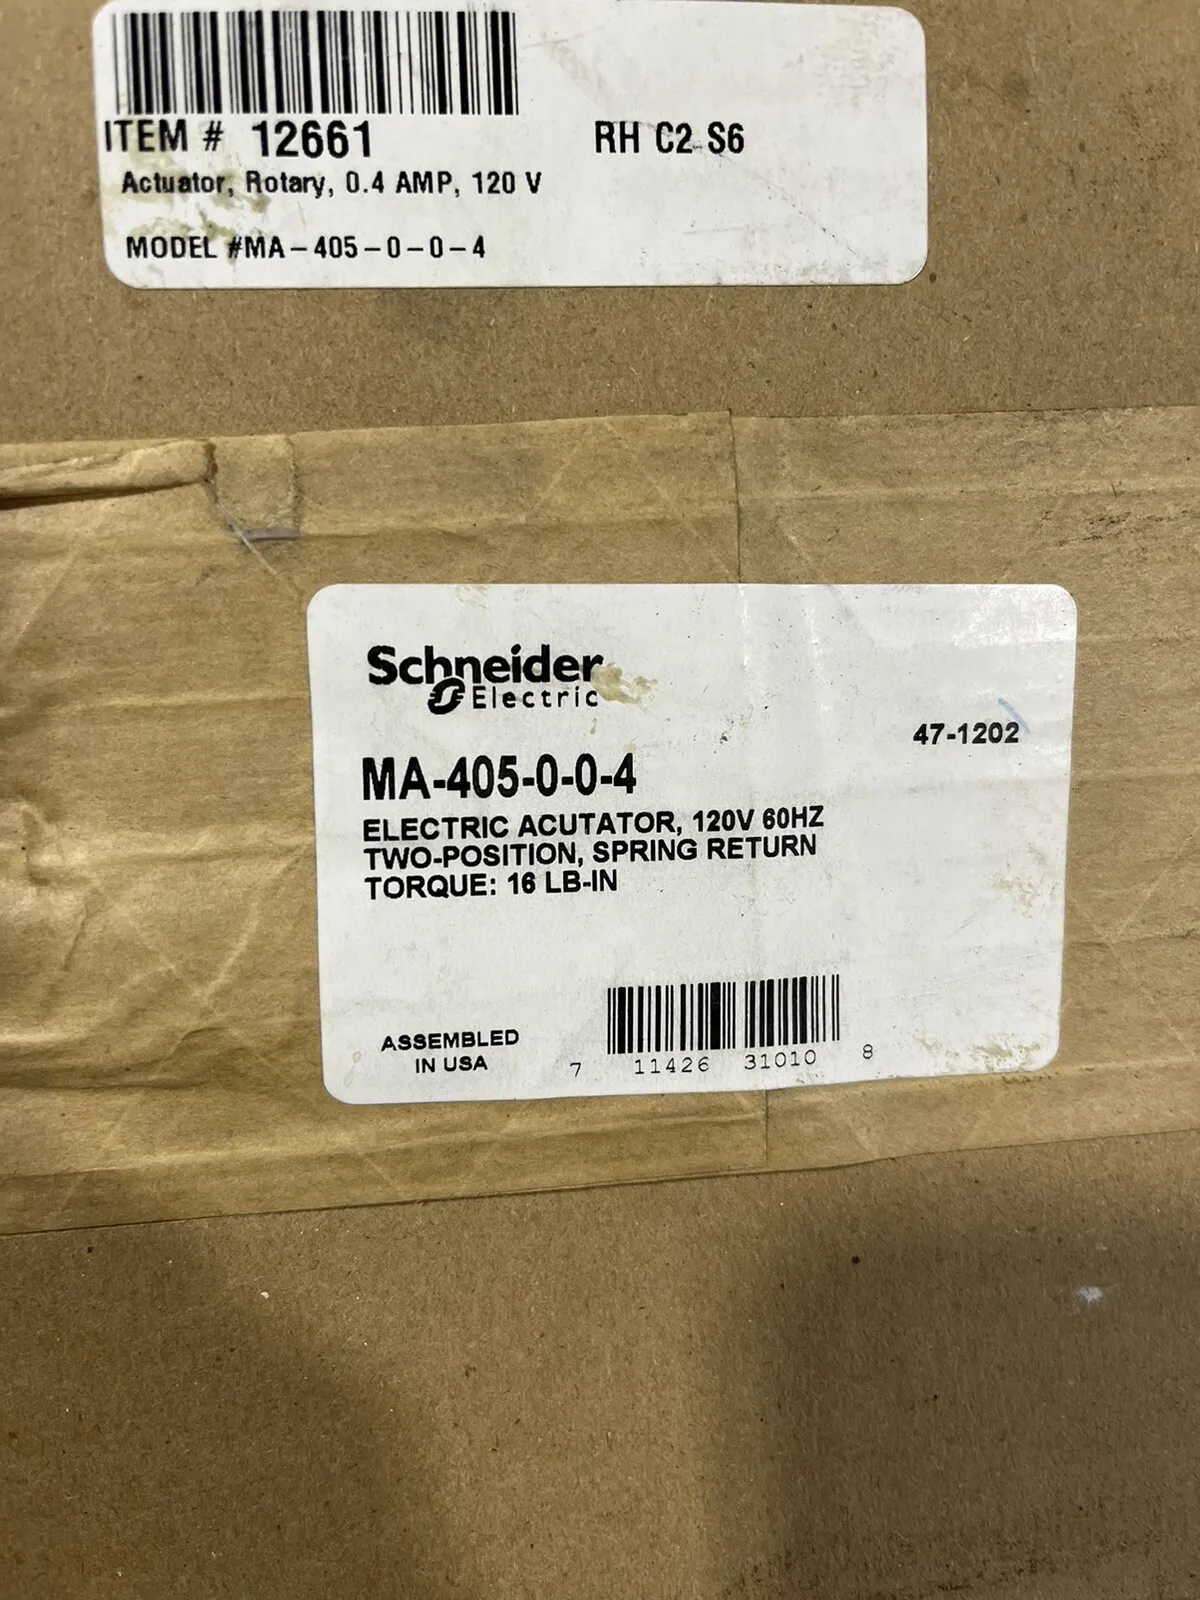 Schneider Electric Ma-405-0-0-4 Actuator Rotary 0.4amp 120 V￼ New In Box